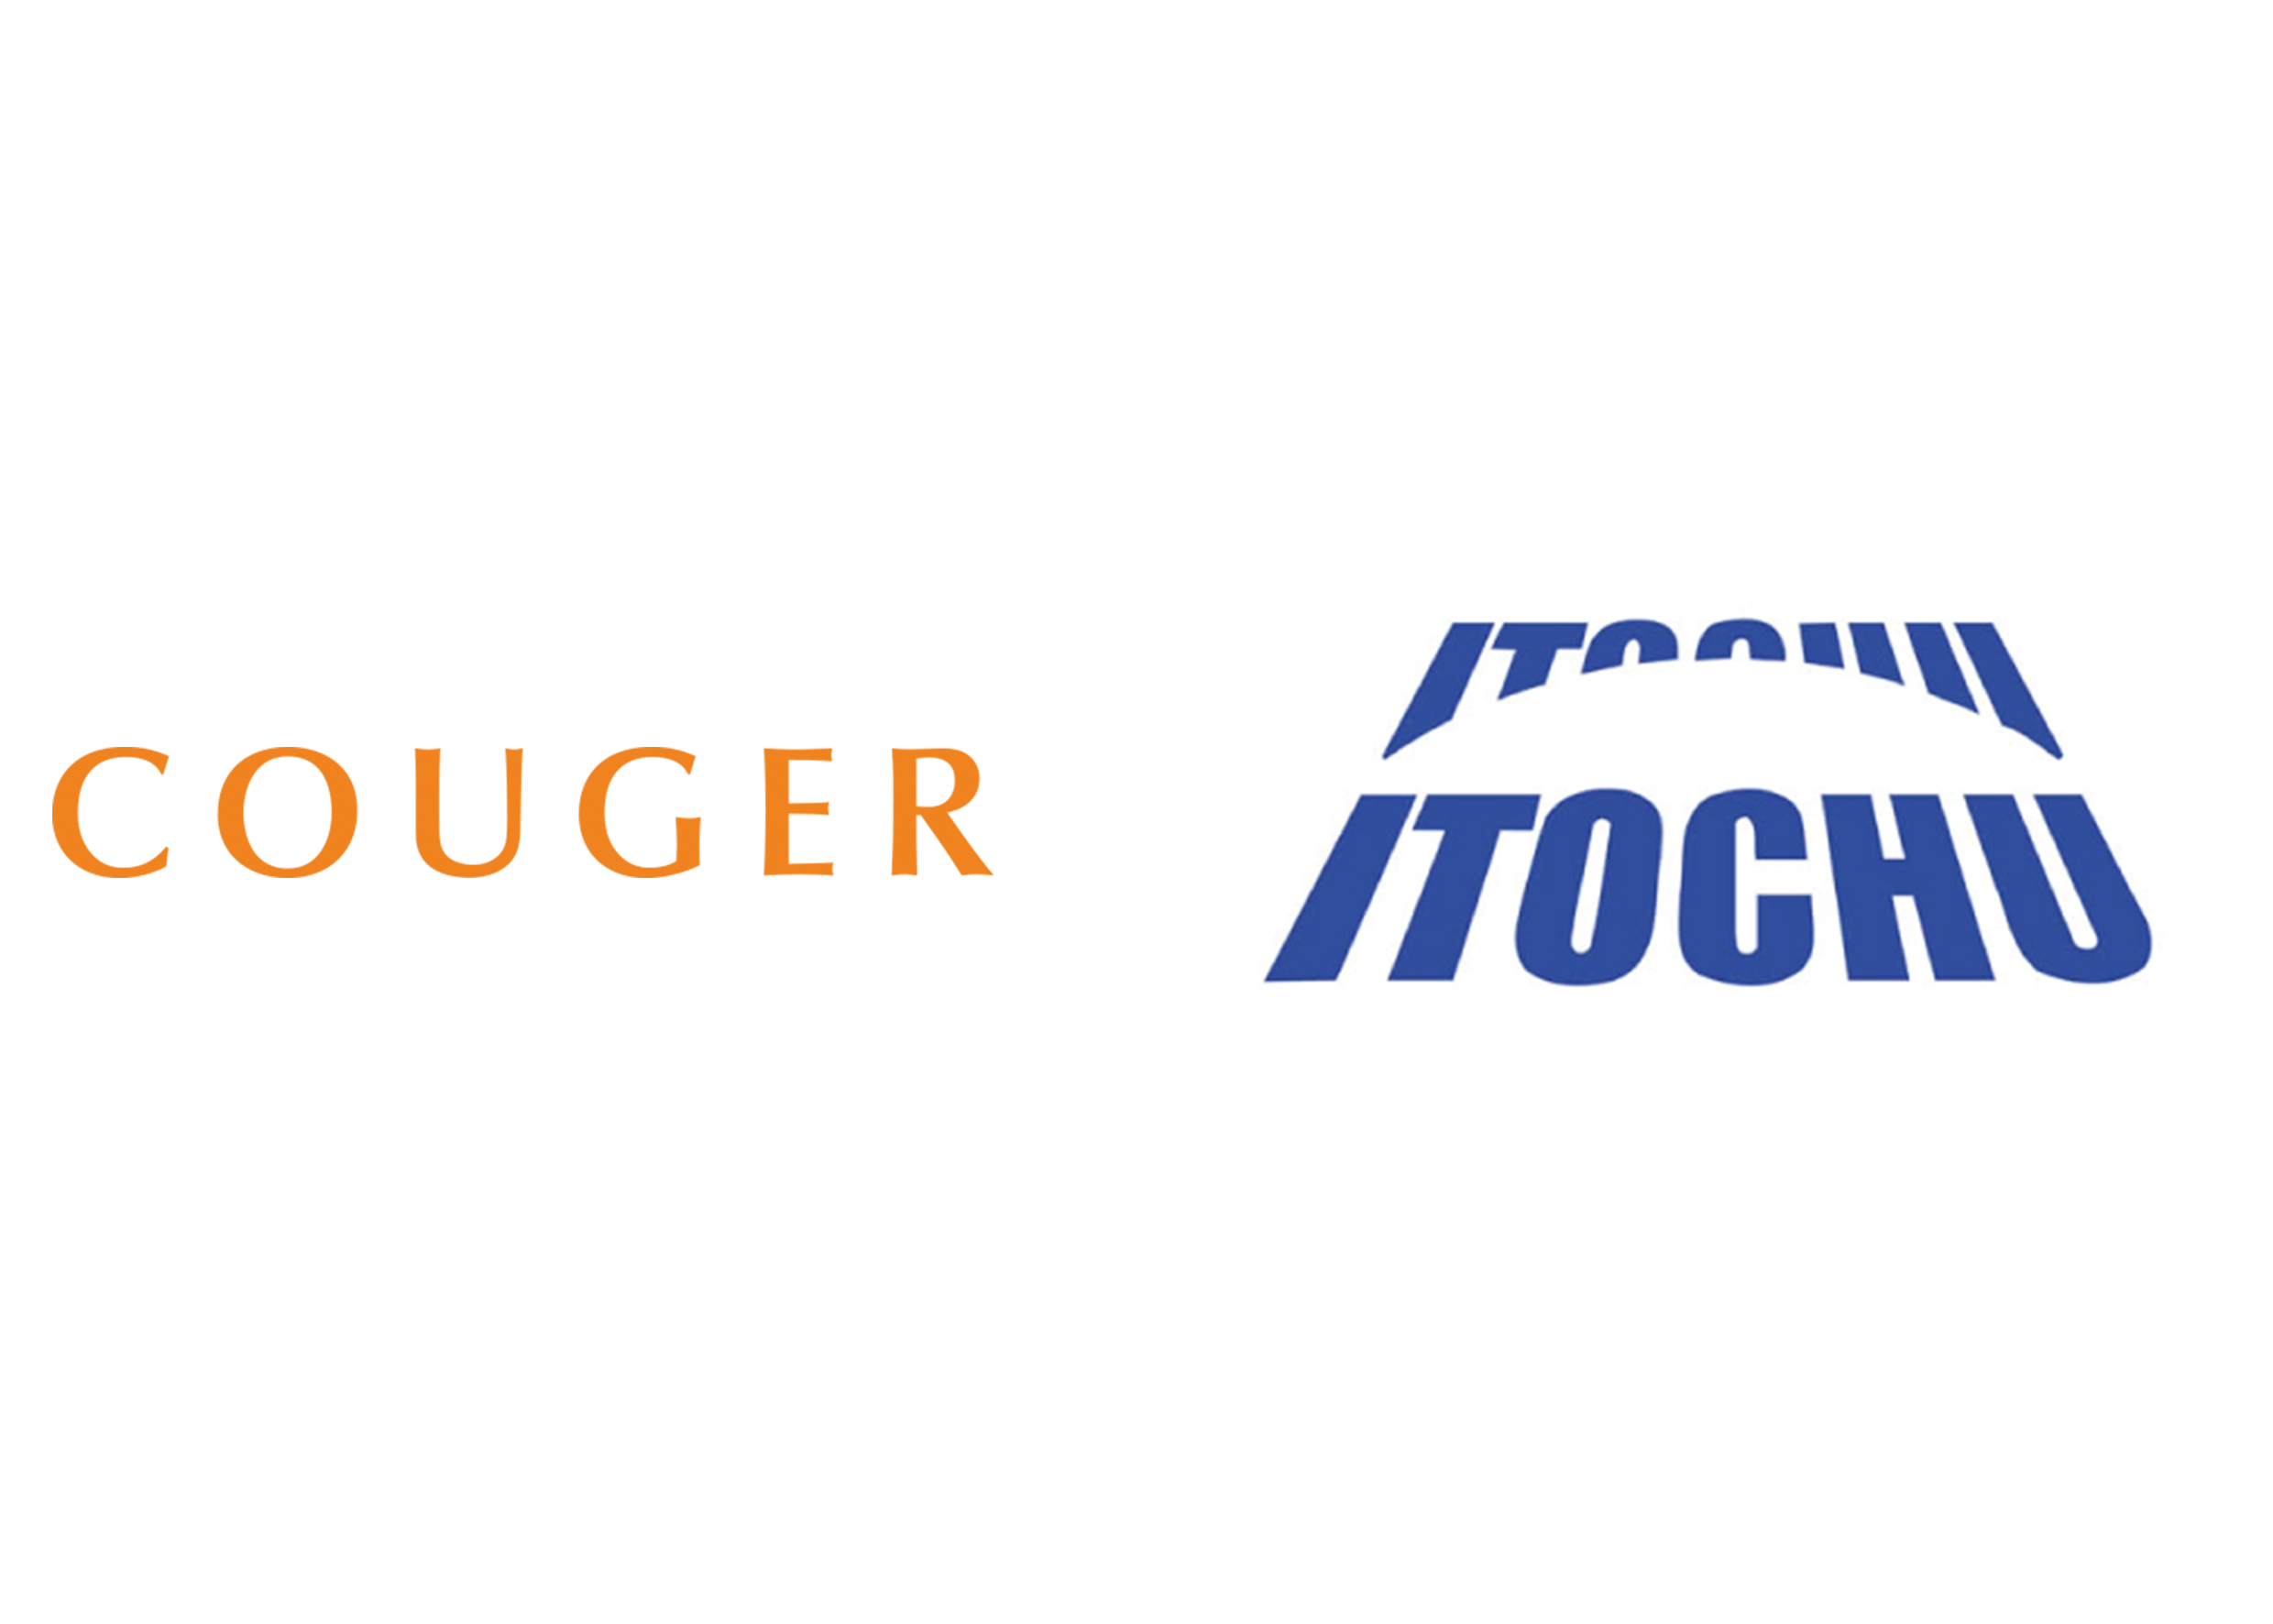 Couger will form a capital and business alliance with ITOCHU ─ to accelerate the provision of AI technology solutions in lifestyle and consumer-related fields.